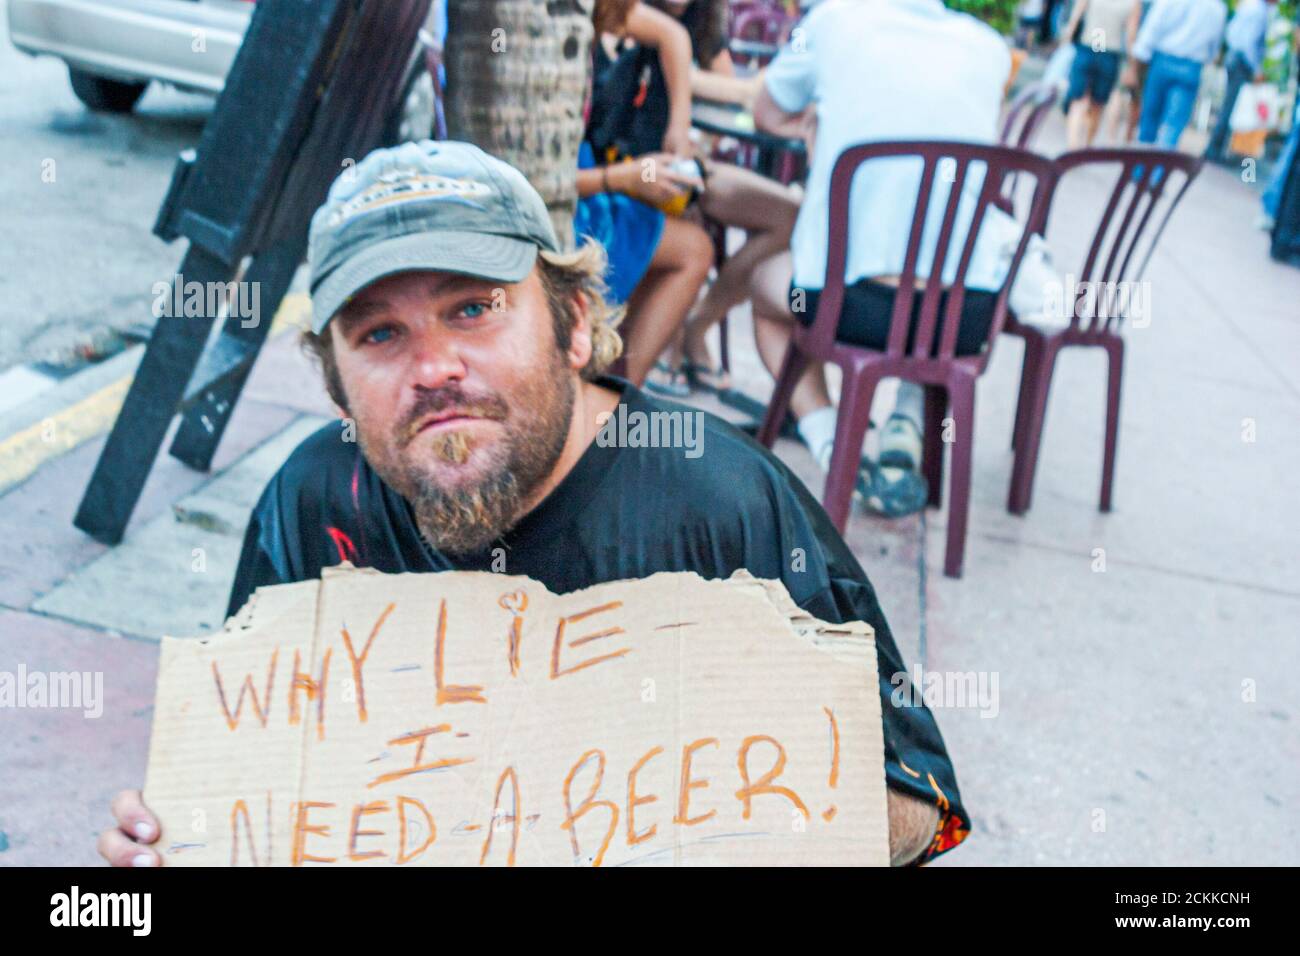 Miami Beach Florida,Ocean Drive,vagrant vagrants homeless beggar beggars bum bums vagabond vagabonds,holds holding hold sign,Why Lie I Need a Beer,hum Stock Photo